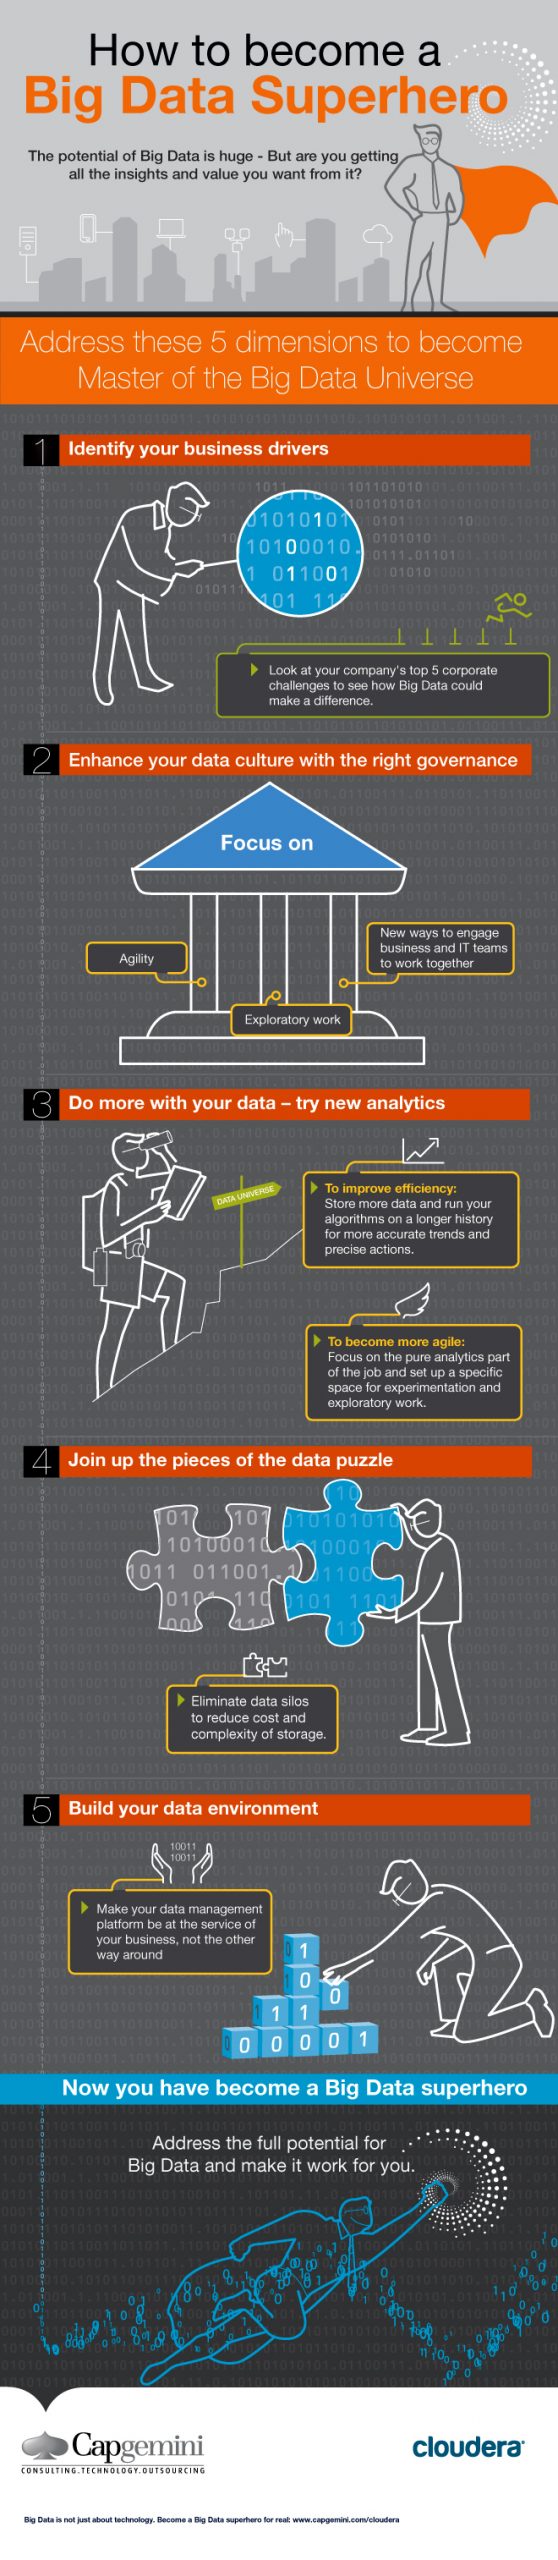 Five Dimensions To Make The Most of Big Data - Infographic